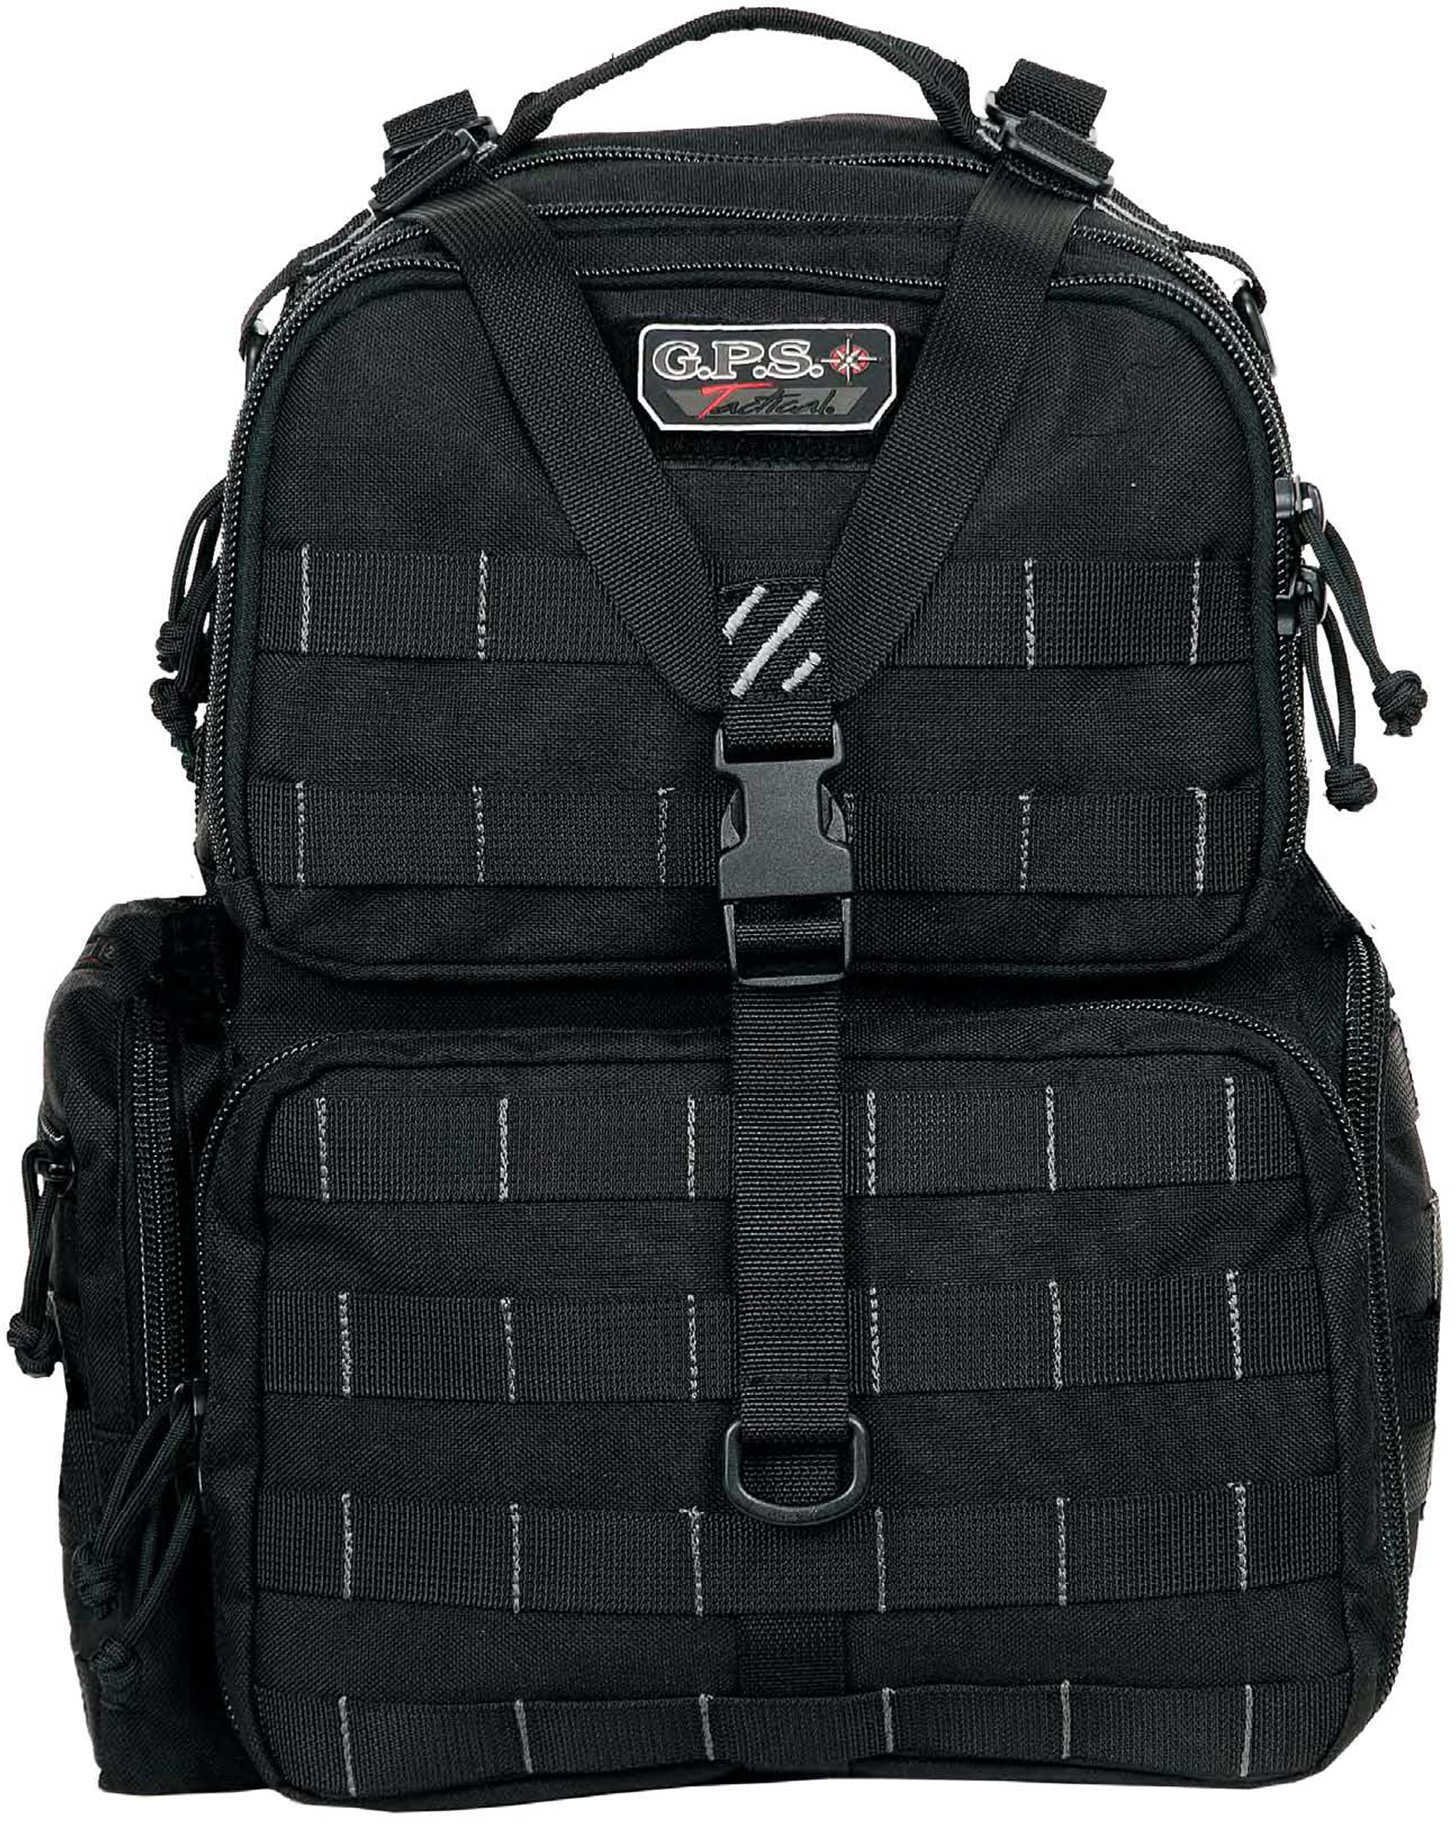 G.P.S. Tactical Range Backpack "Tall" with Waist Strap in Black